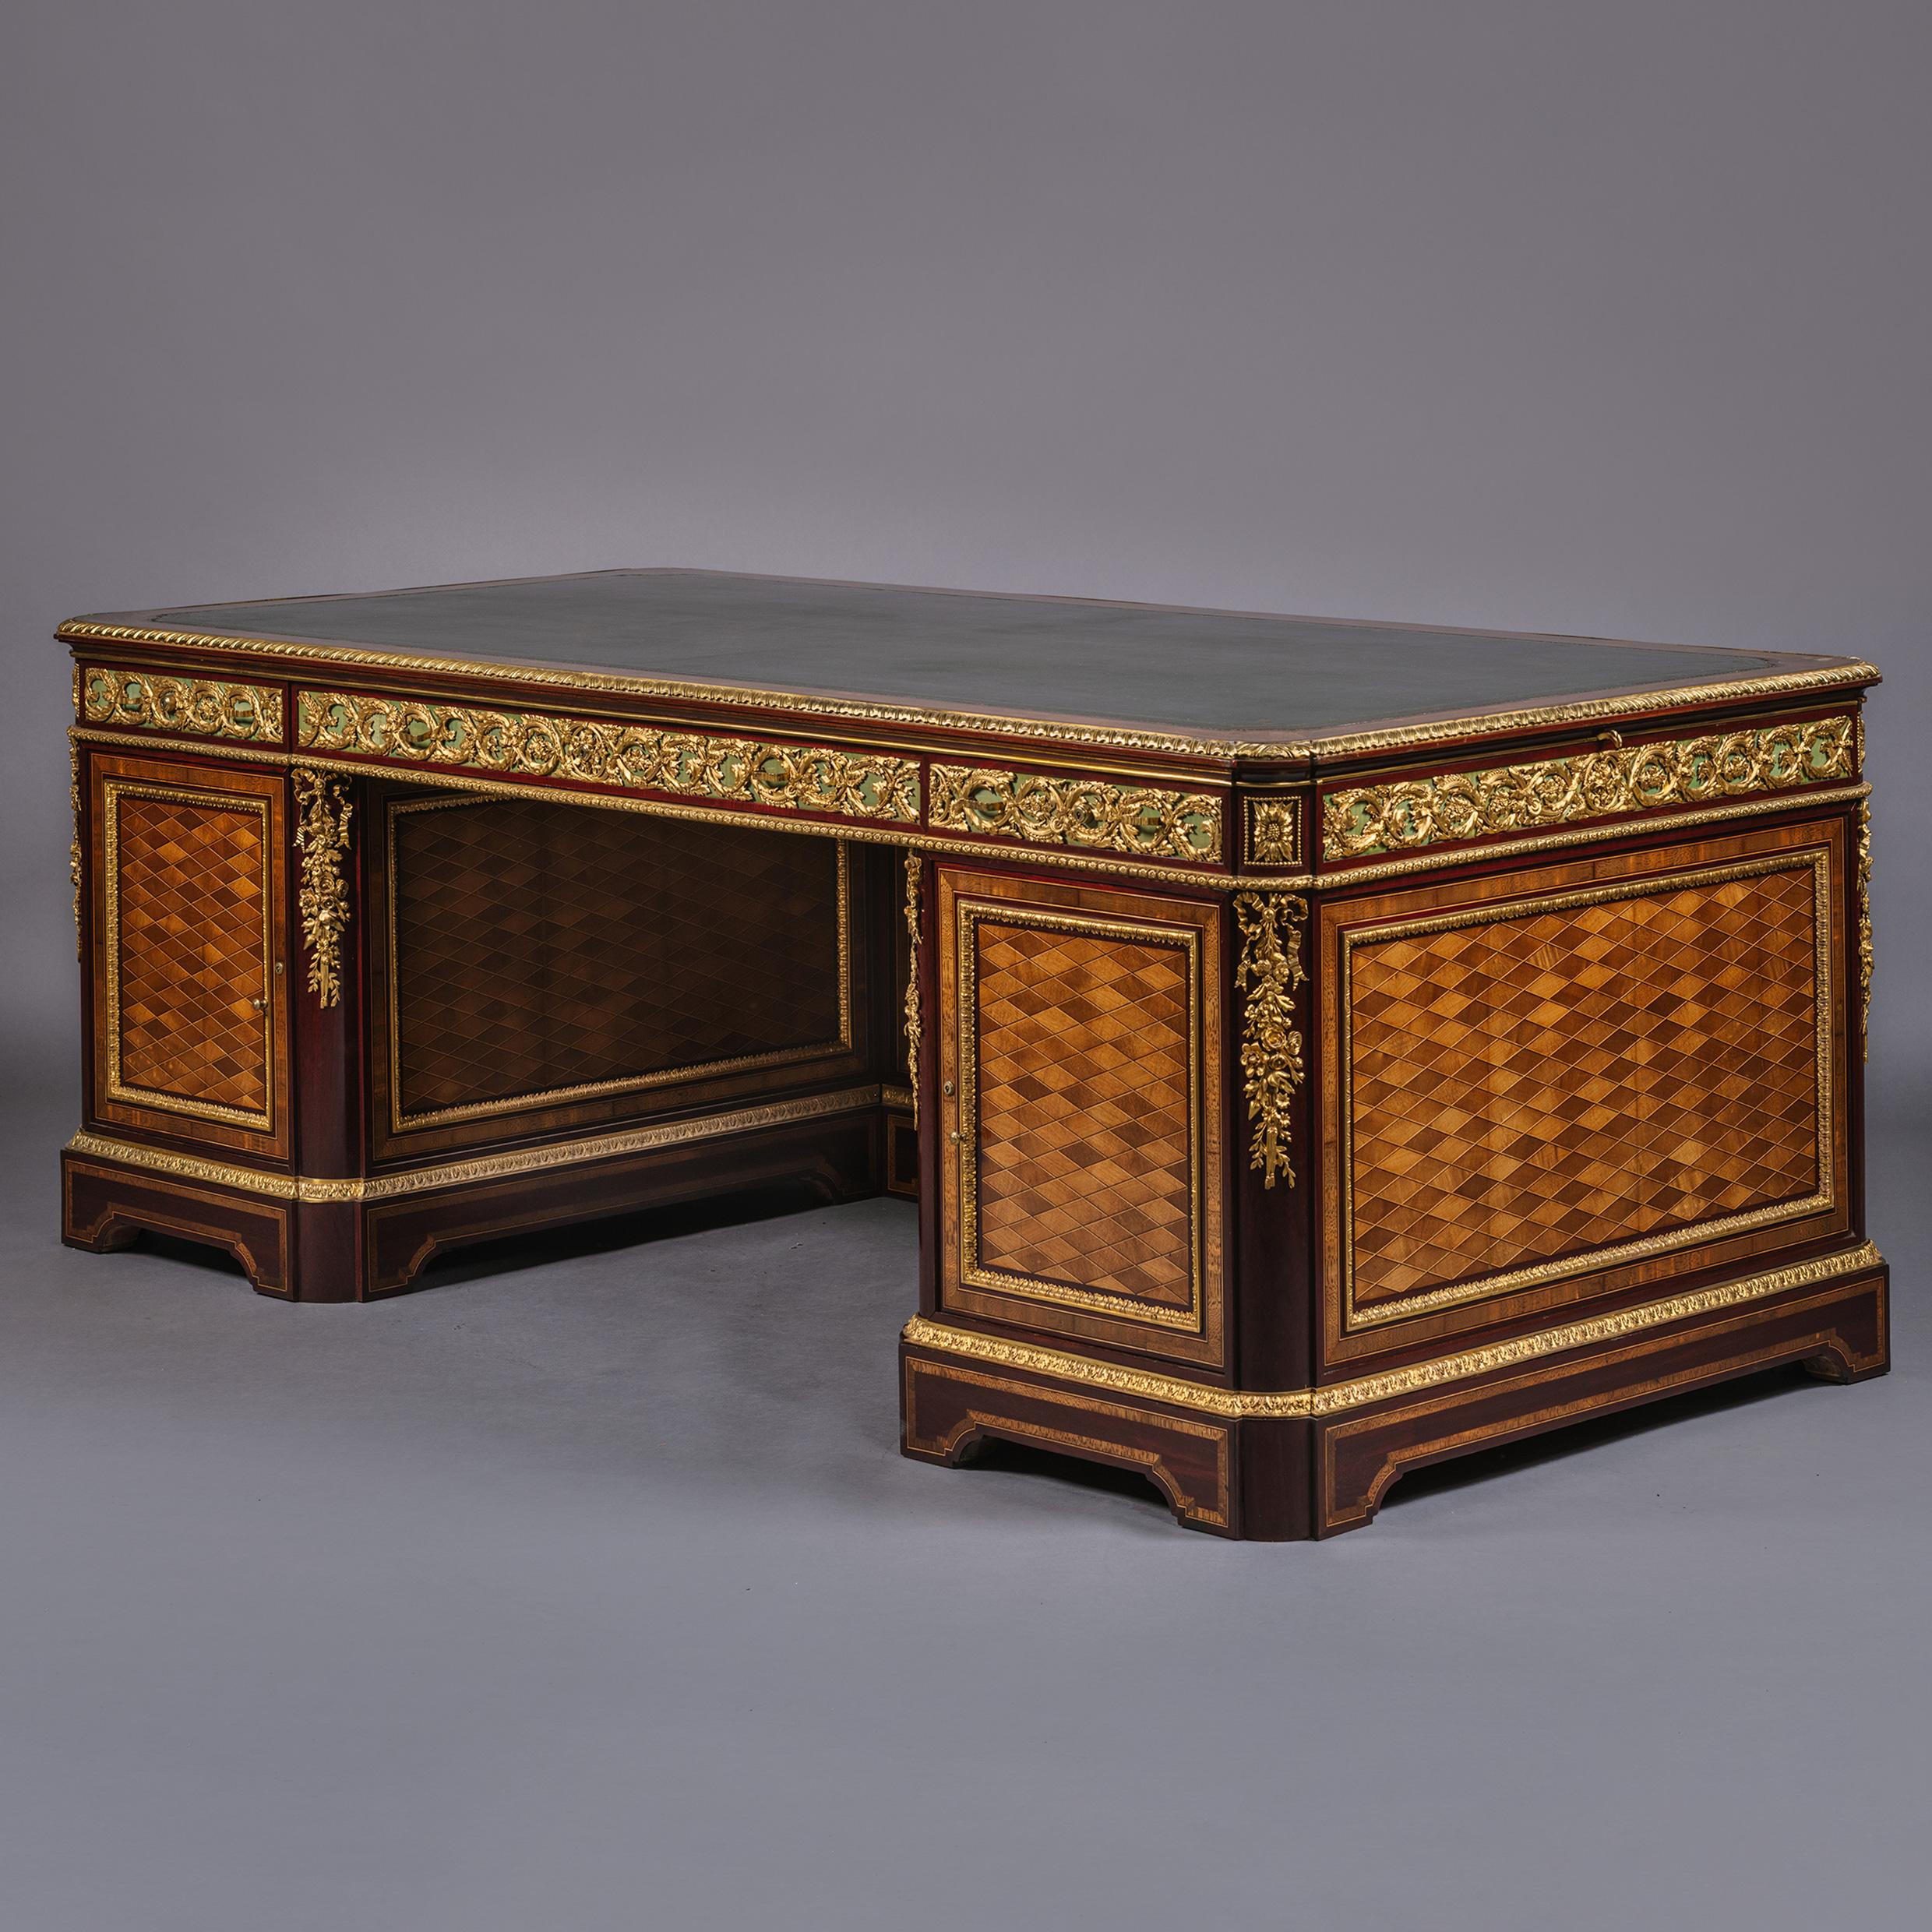 An Important Napoleon III Gilt-Bronze Mounted Parquetry Pedestal Desk, By Guillaume Grohé. France, Circa 1860.

Stamped to the top edge of one door 'GROHE FRERES Ebeniste a PARIS'

Grand in scale and very useable, this impressive pedestal desk is